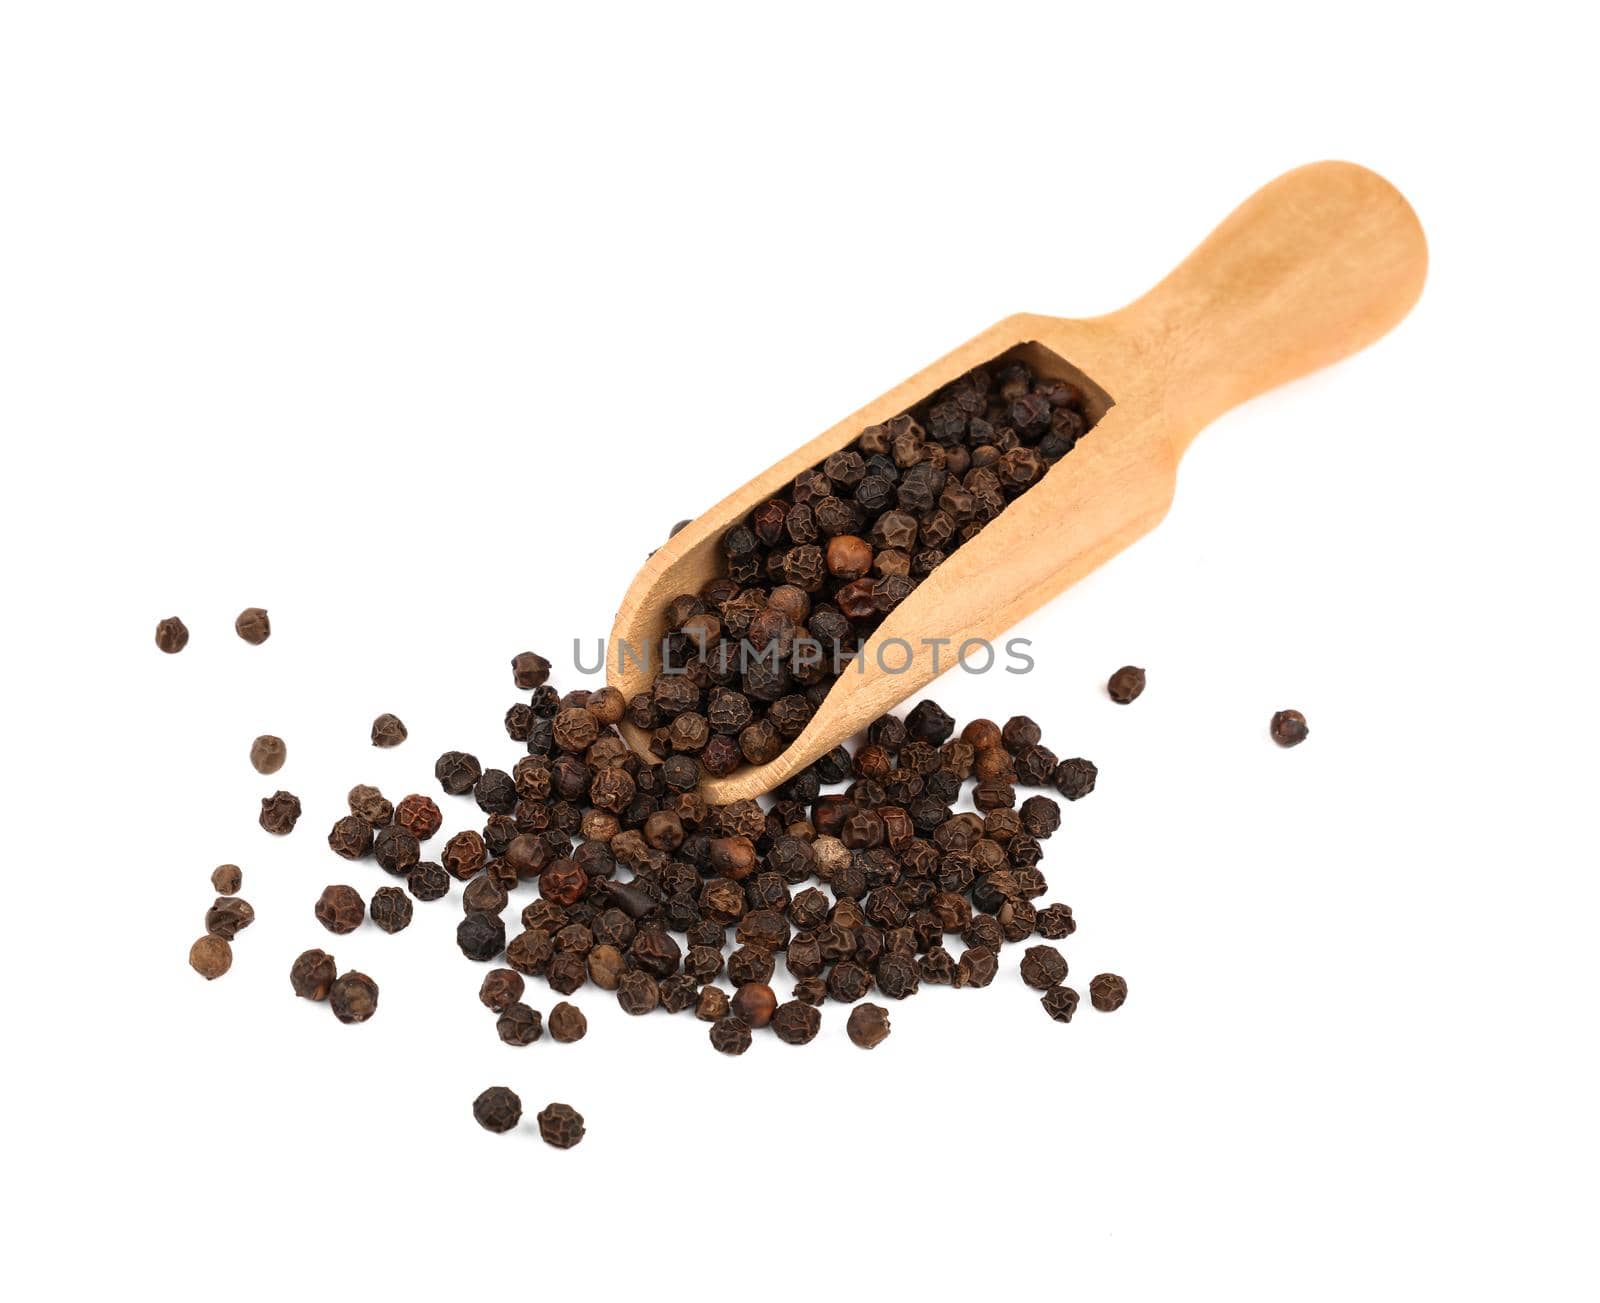 Close up one wooden scoop full of black pepper peppercorns and heap of peppercorns spilled and spread around isolated on white background, high angle view